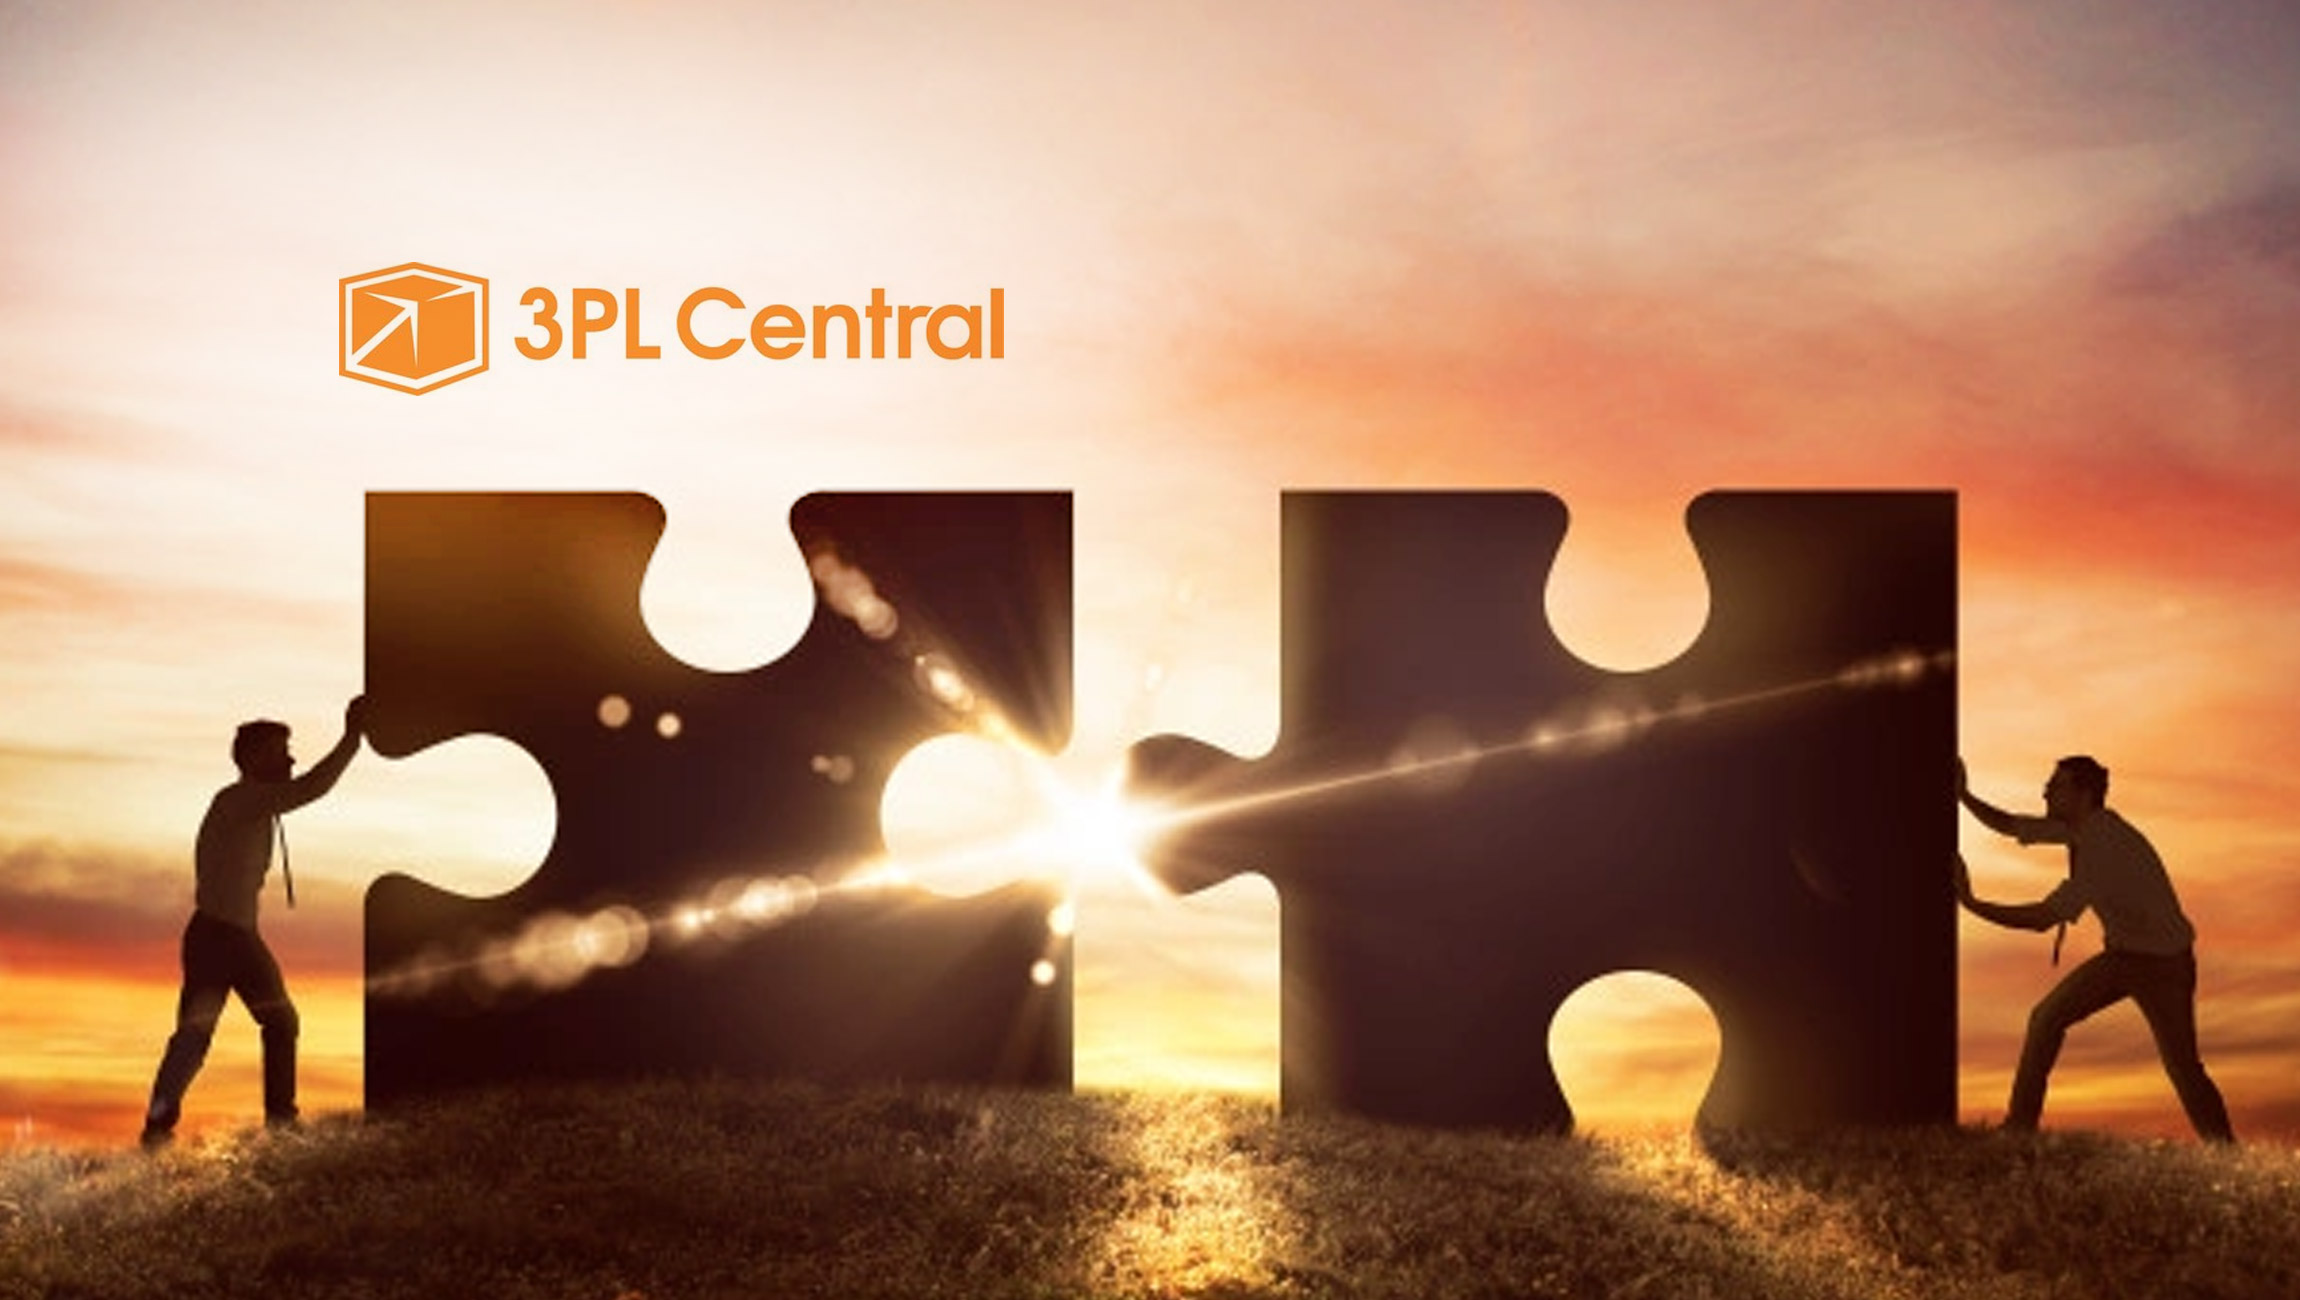 3PL Central Acquires CartRover to Drive Seamless Integrations for Omnichannel Fulfillment